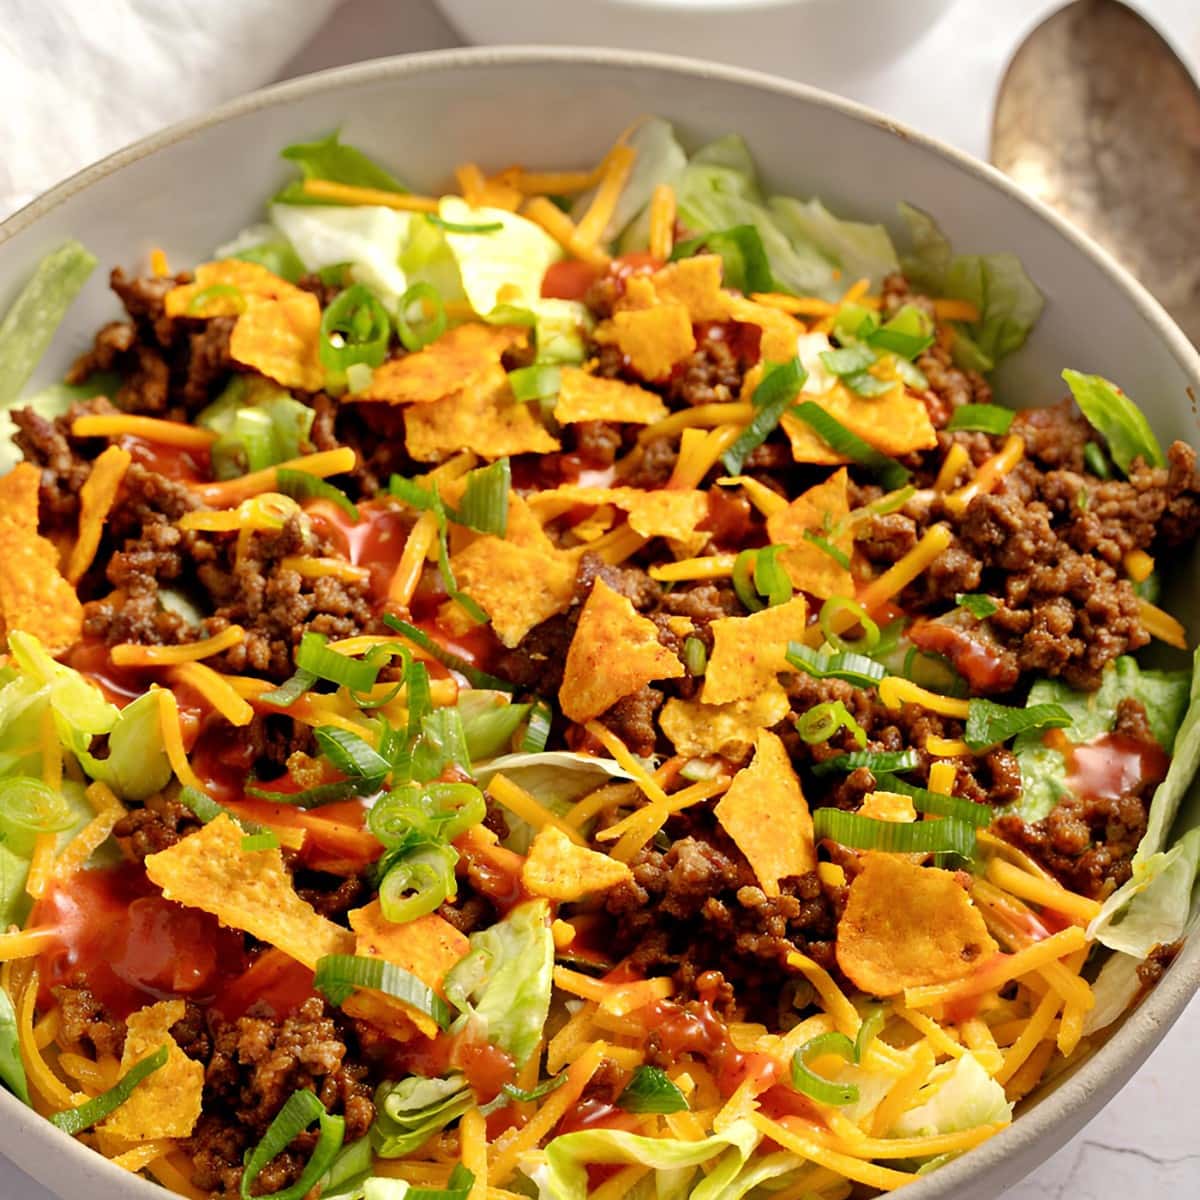 Taco Salad Close-Up Photo with ground beef, nacho's, cheese, and Catalina dressing